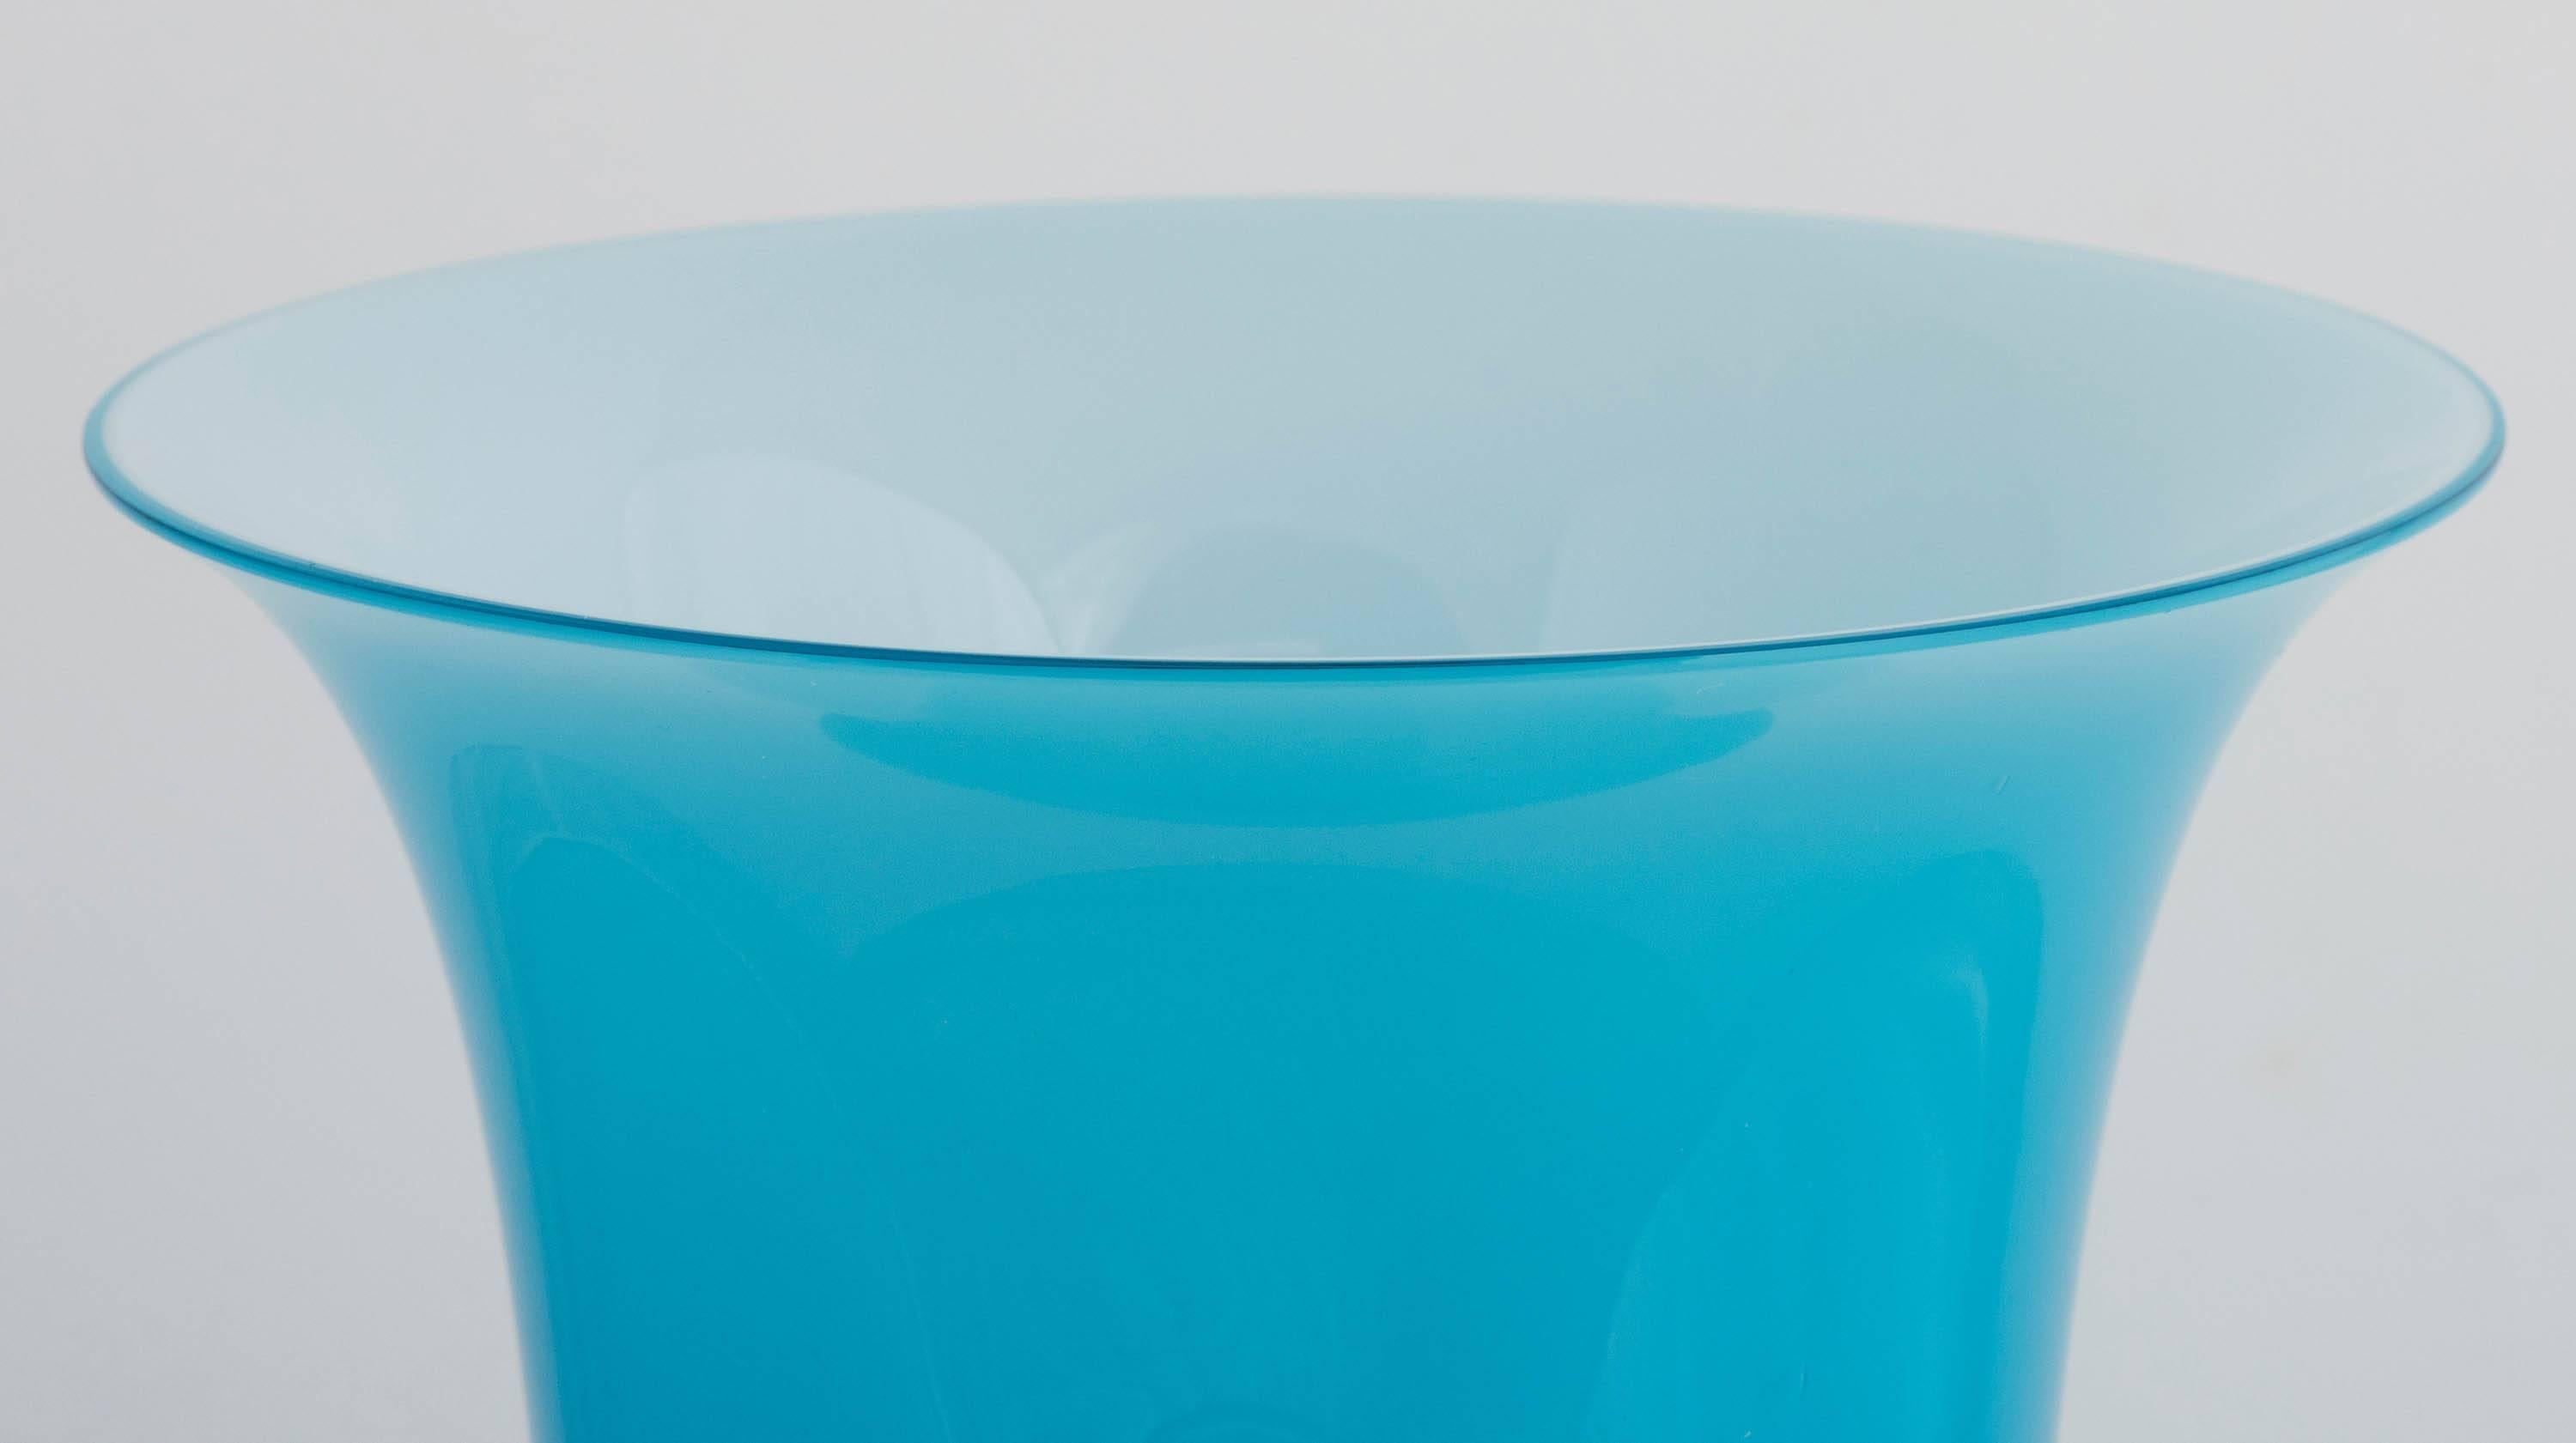 Venini turquoise Murano glass with black foot, Italy, circa 1990
Label to side.
Signed to base.
Italy, circa 1990.
Measure: 36 cm high x 17 cm diameter.
 